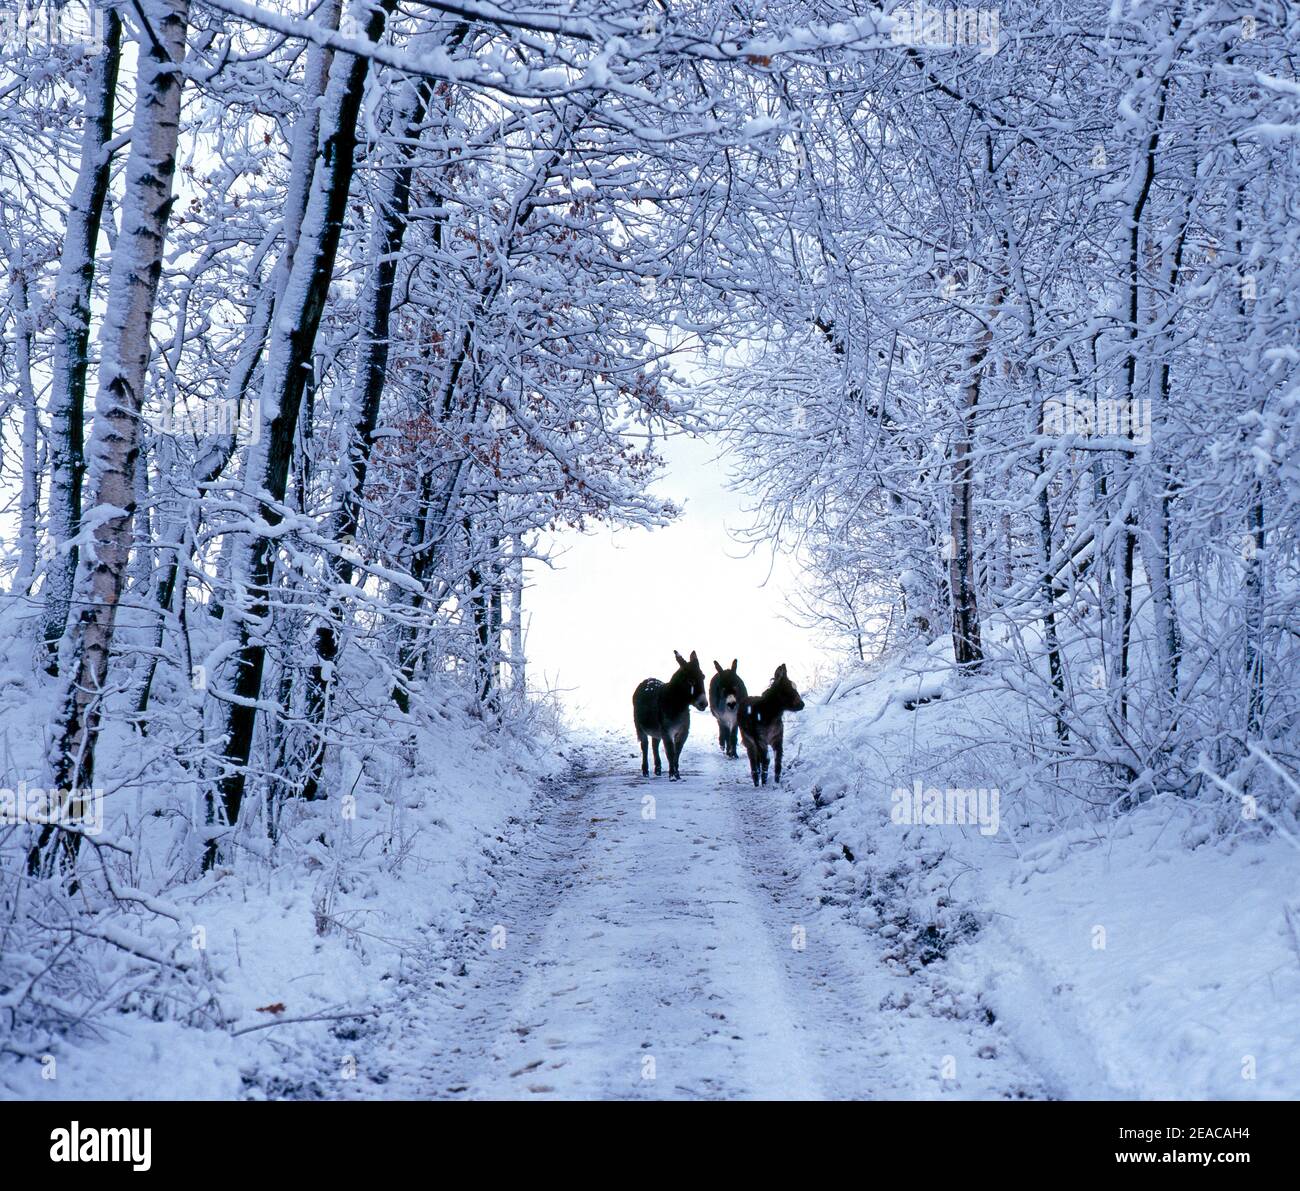 Three donkeys on a snow-covered forest path Stock Photo